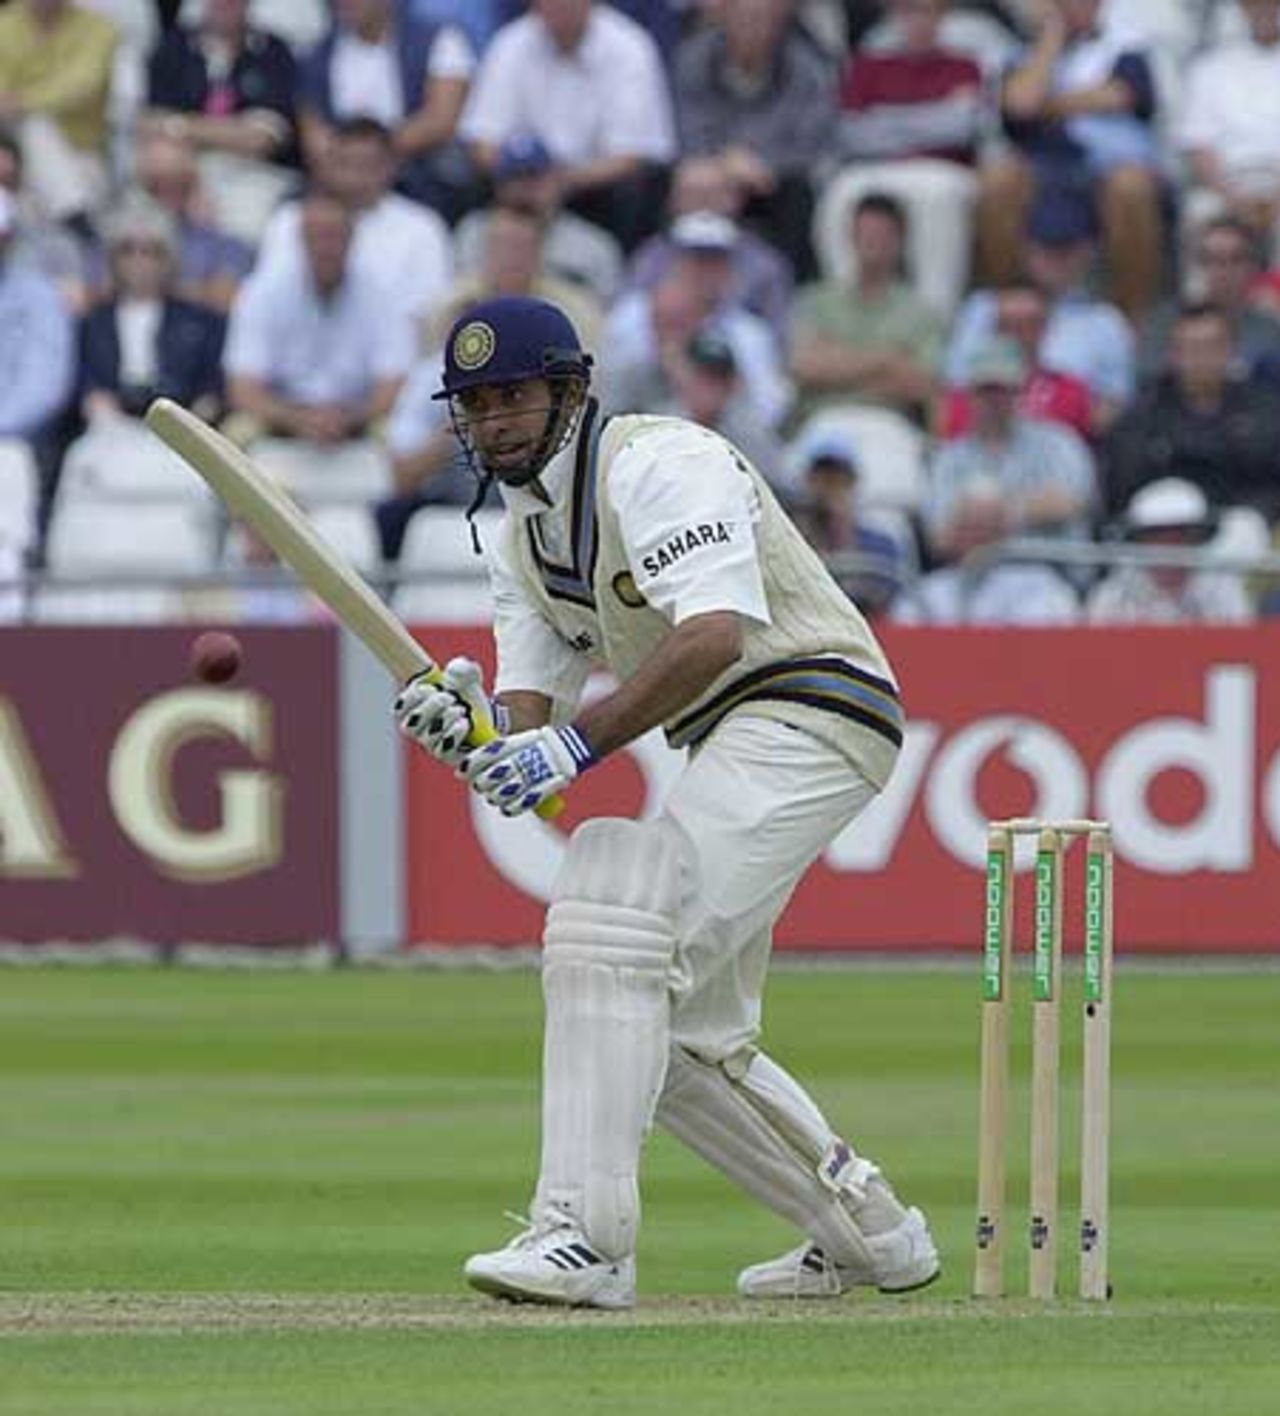 VVS Laxman is stout in defence in the Indian first innings, 2nd npower Test at Trent Bridge, August 2002